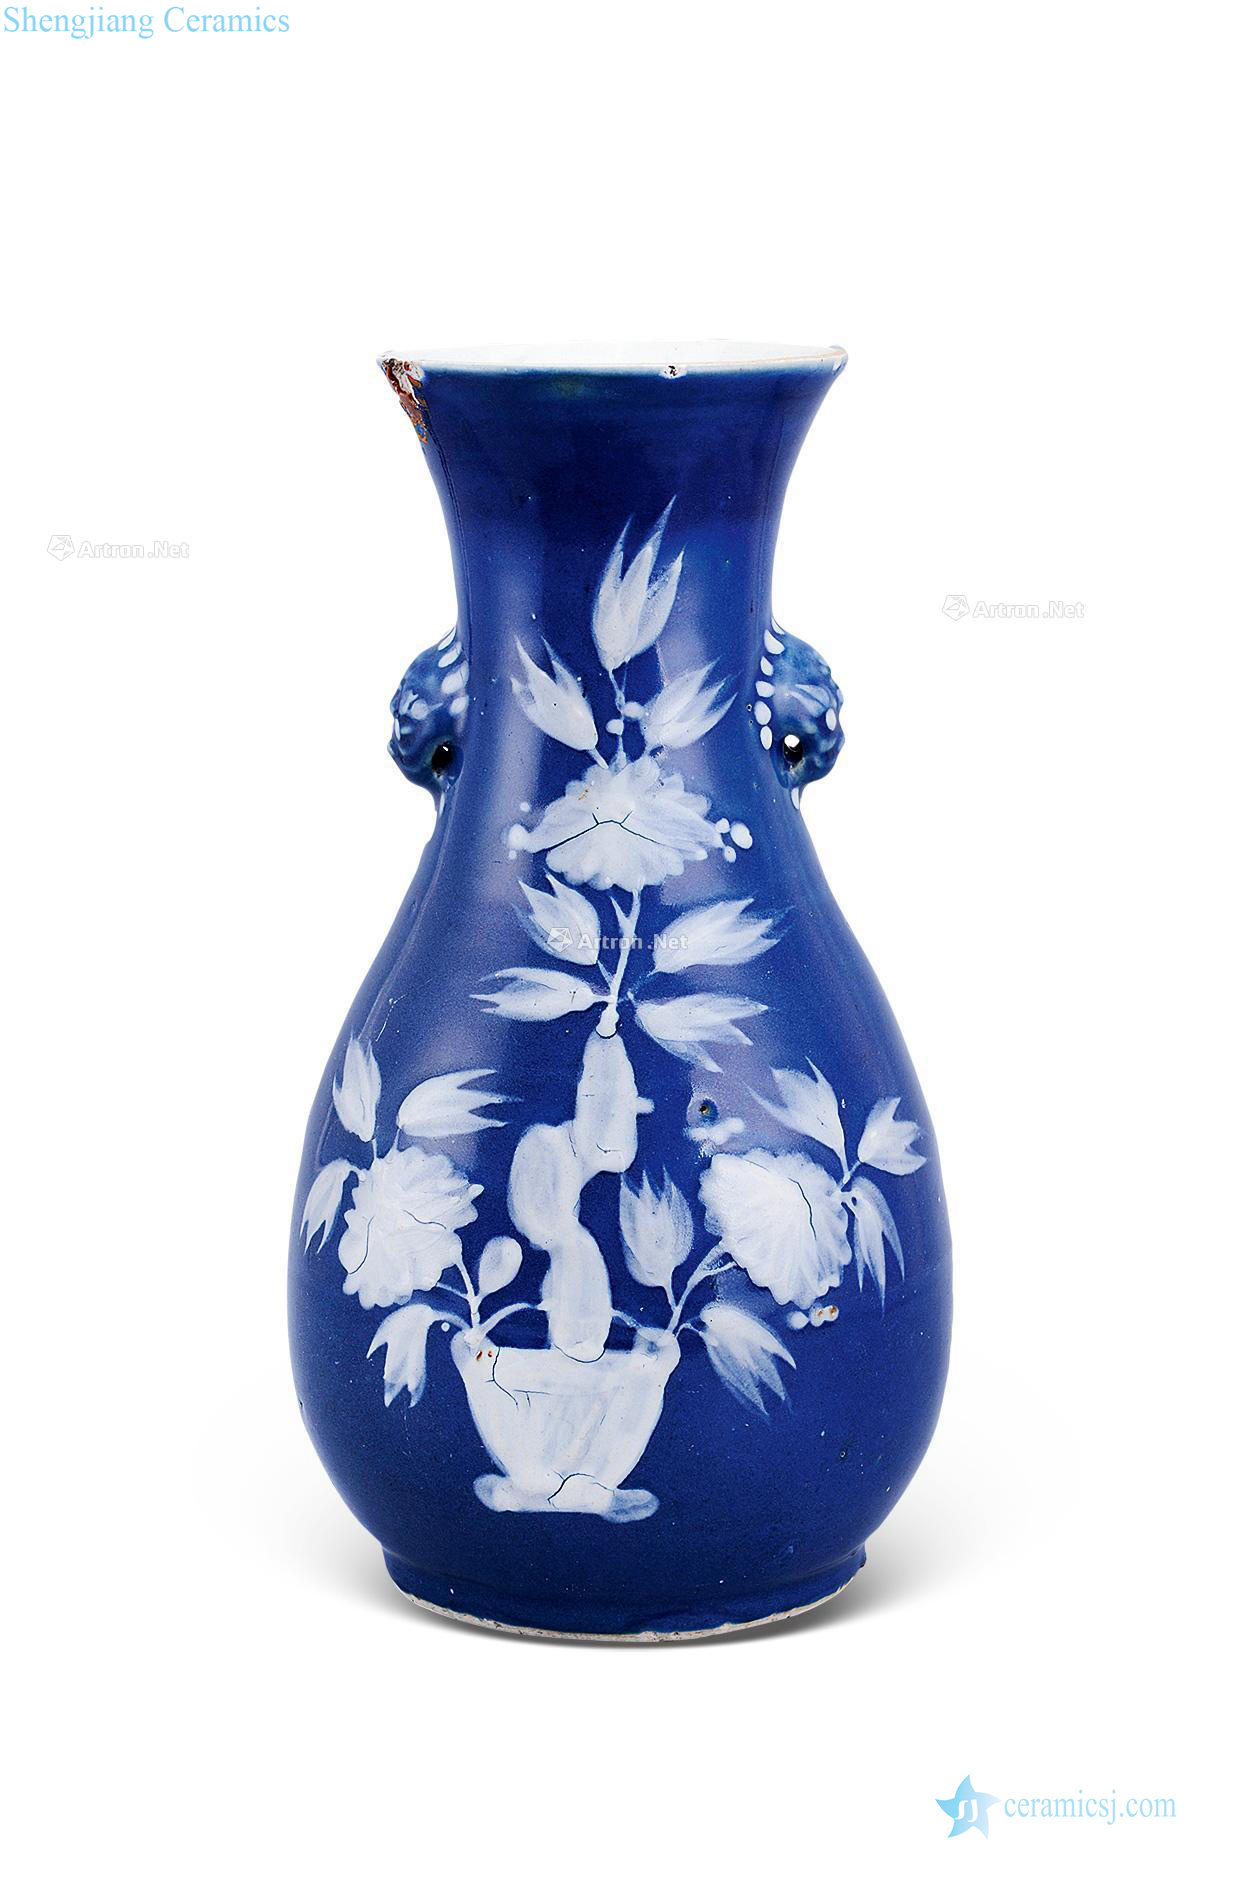 Ming The blue glaze vase with a bunch of white flowers grain beast